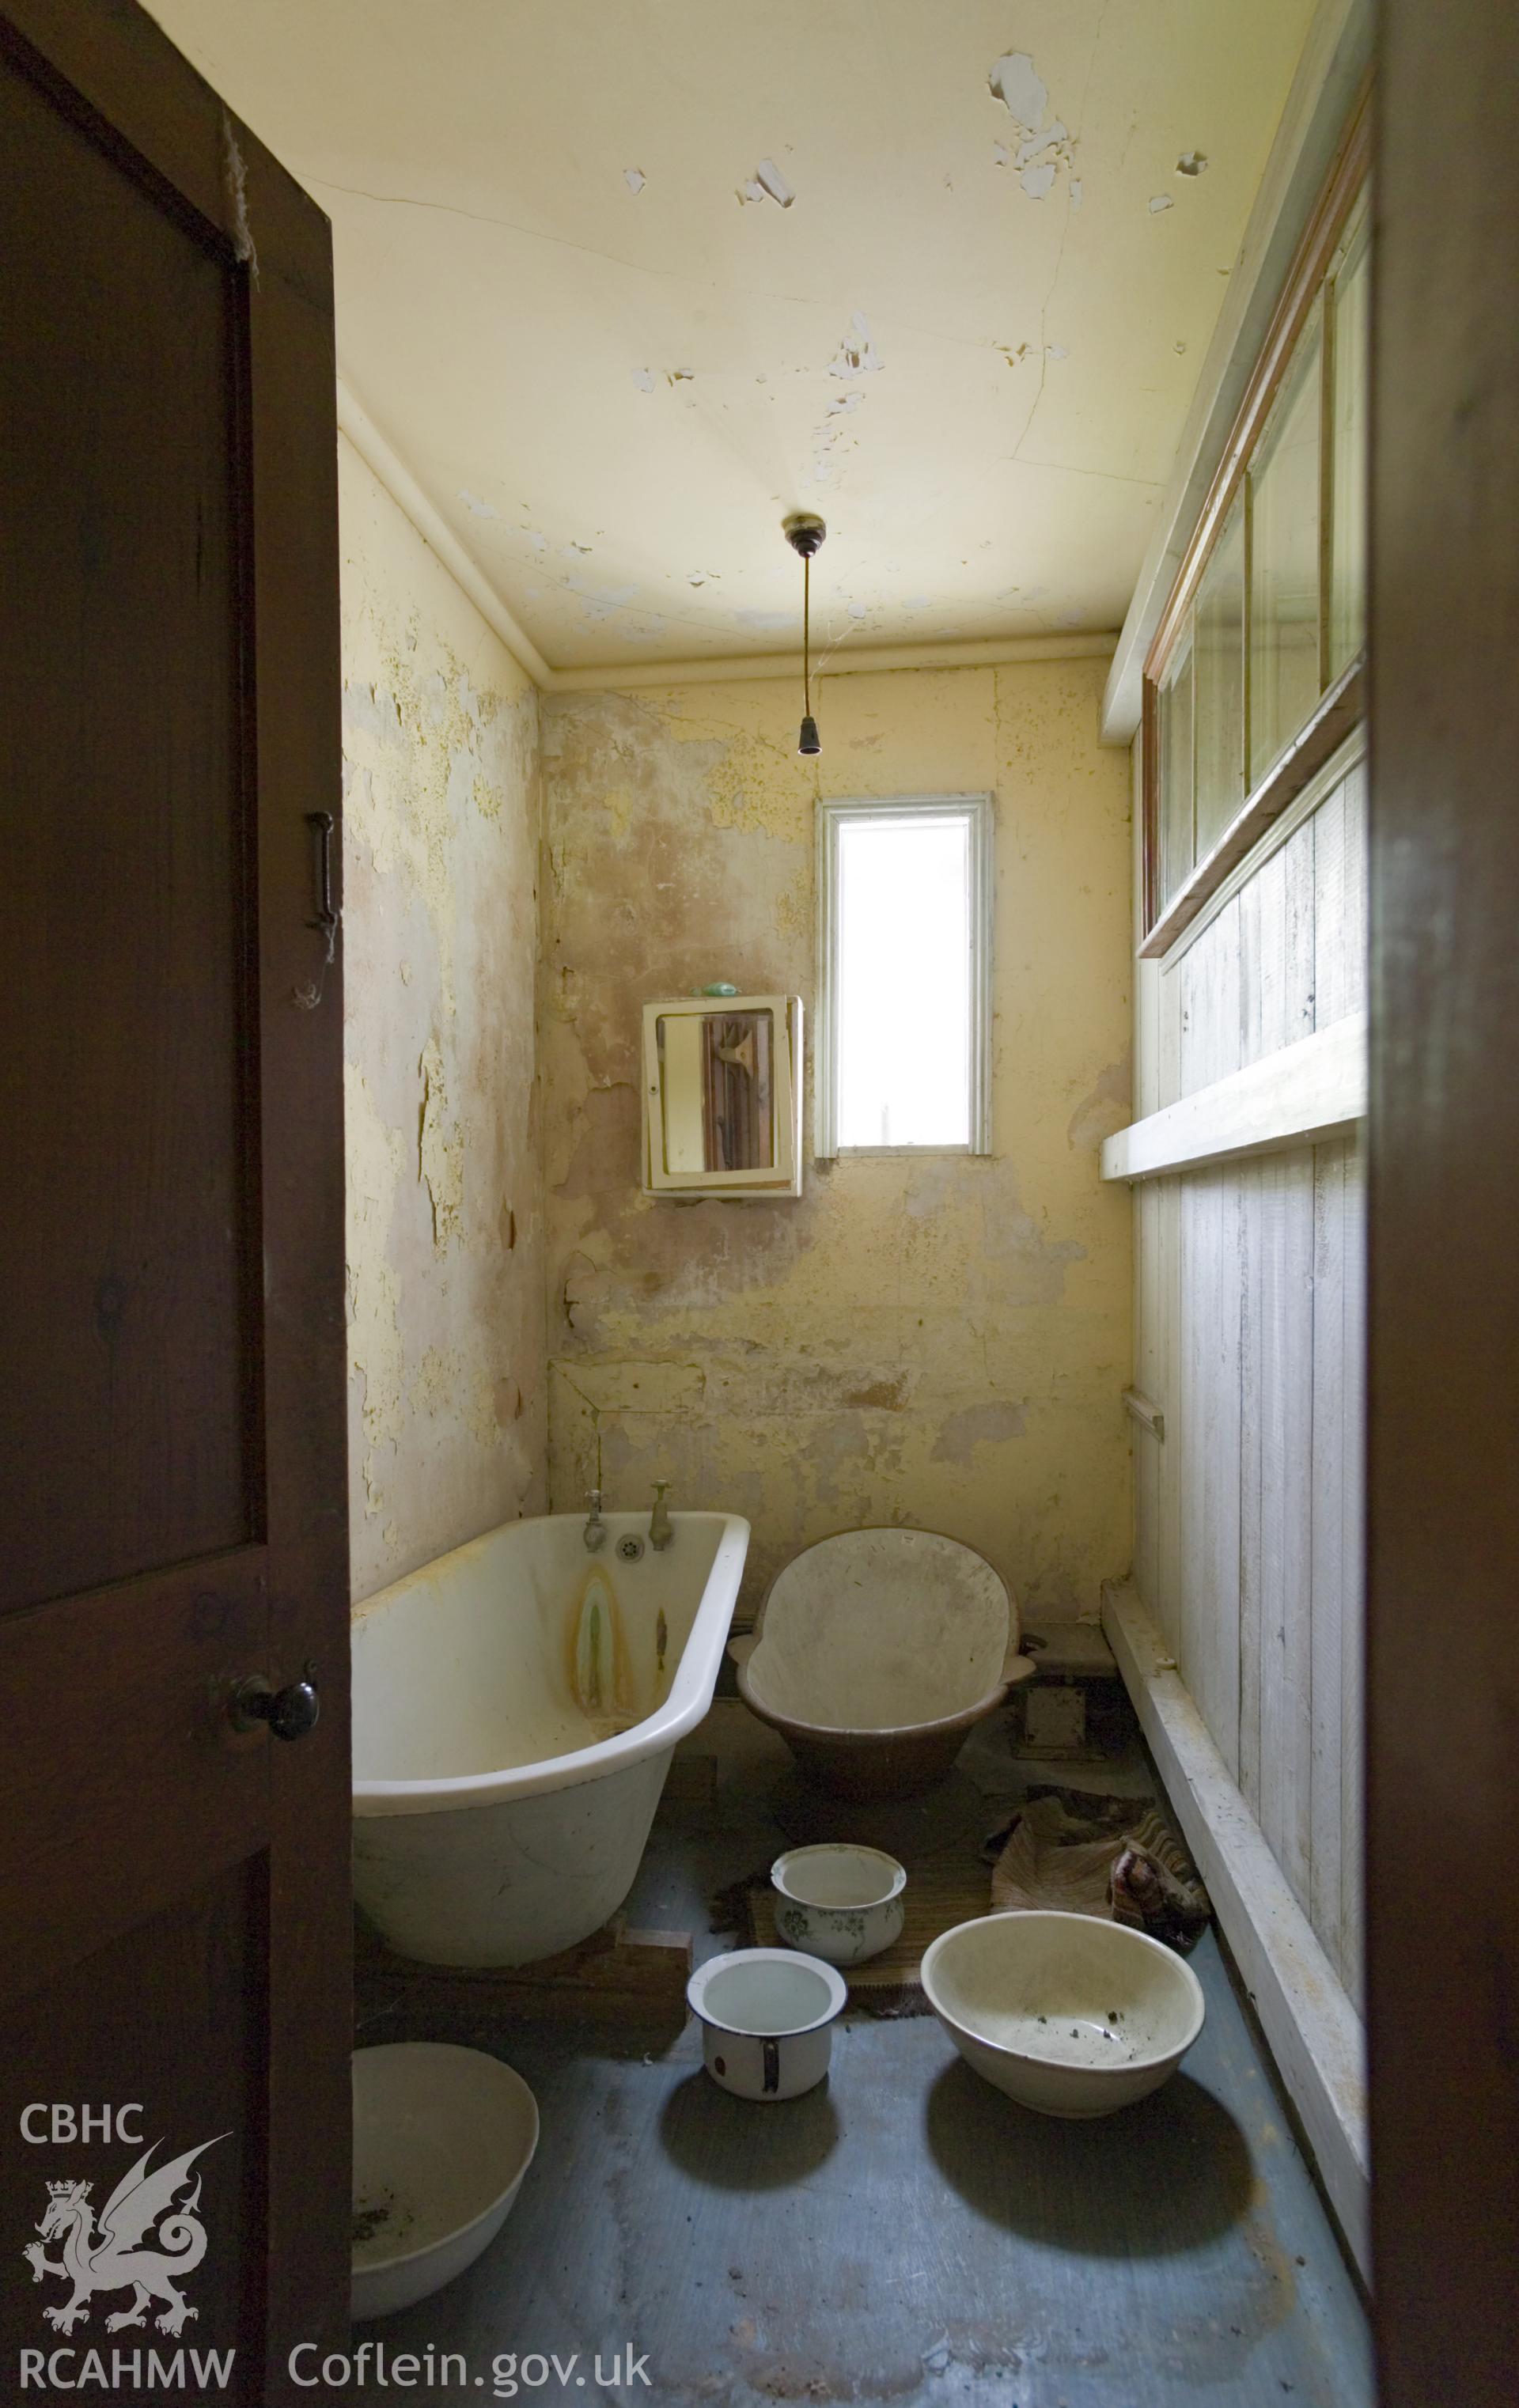 Bathroom divided from servants quarters.